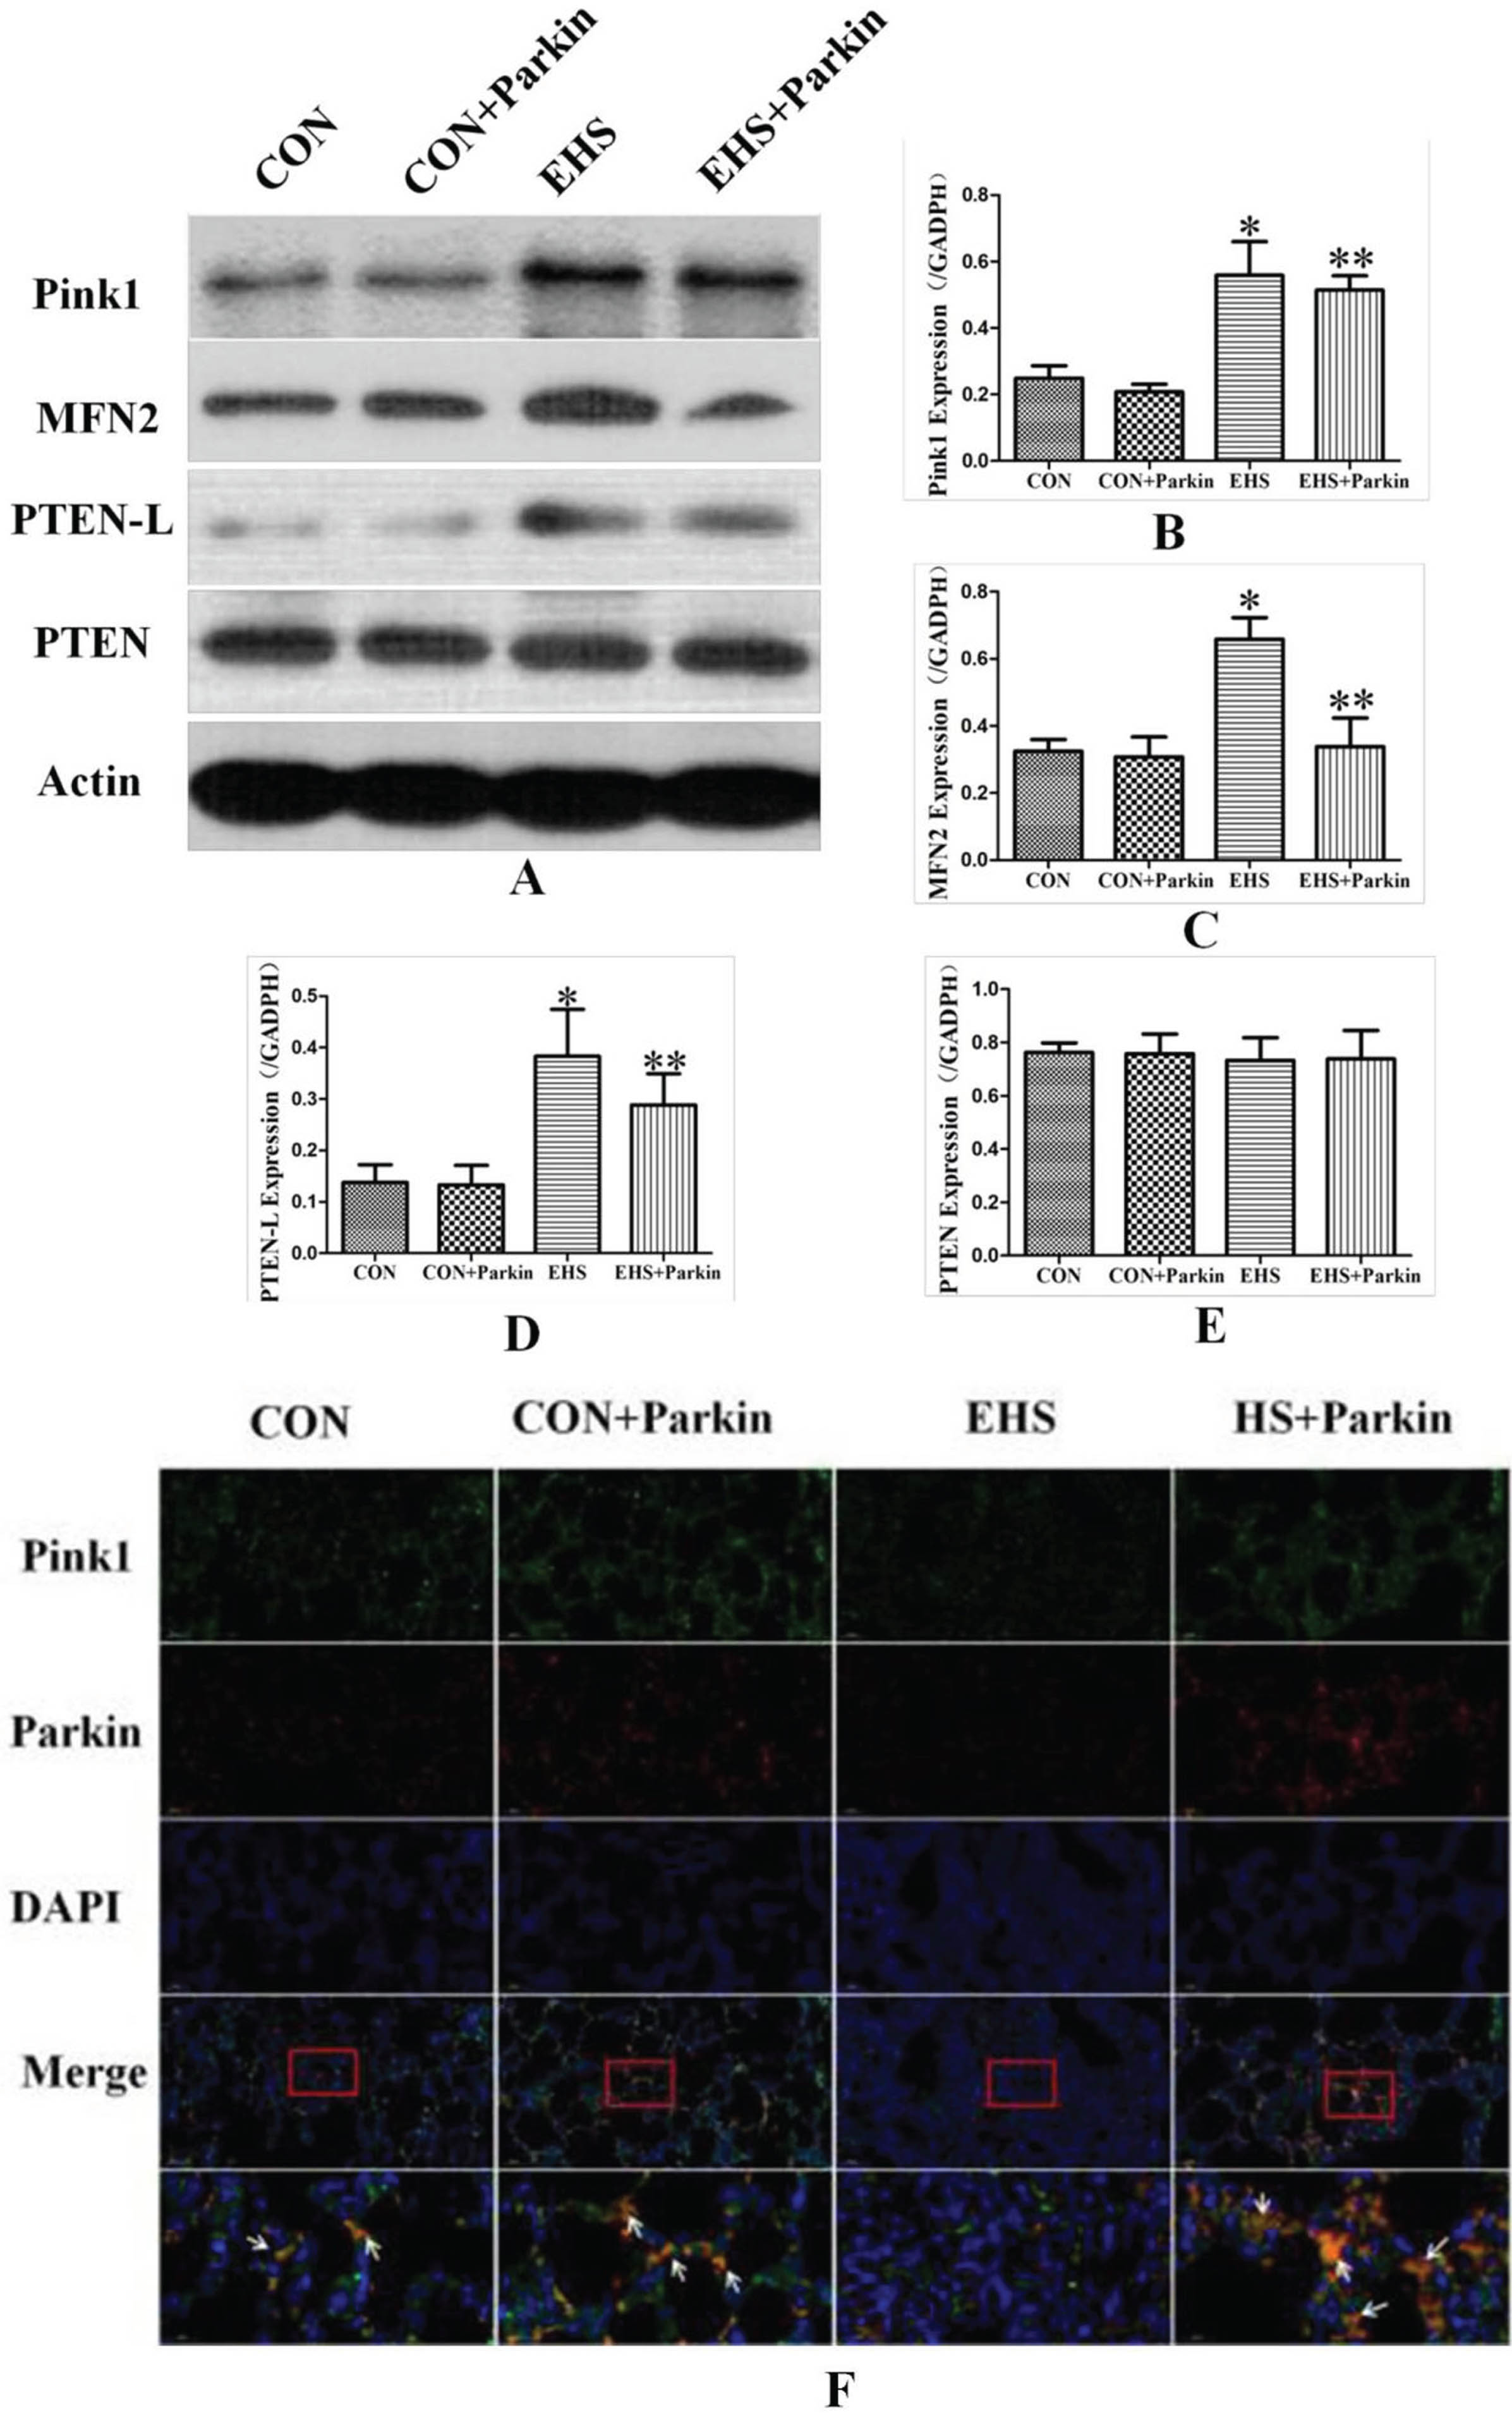 Parkin over-expression rats activate the Pink1/Parkin pathway in their lung (N = 5). A: The protein levels of Pink1, MFN2, PTEN-L, and PTEN in lung tissues were performed by immunoblotting. B-D: The statistical analysis of Pink1, MFN2, PTEN-L, and PTEN expression. *P < 0.05 vs Control group; **P < 0.05 vs EHS group. E: Immunofluorescence staining against Pink1 and Parkin was performed and observed by fluorescent microscopy. Pink (green), Parkin (red), The co-staining (orange) of Pink1 and Parkin was showed by the white arrow, bar = 50μm.